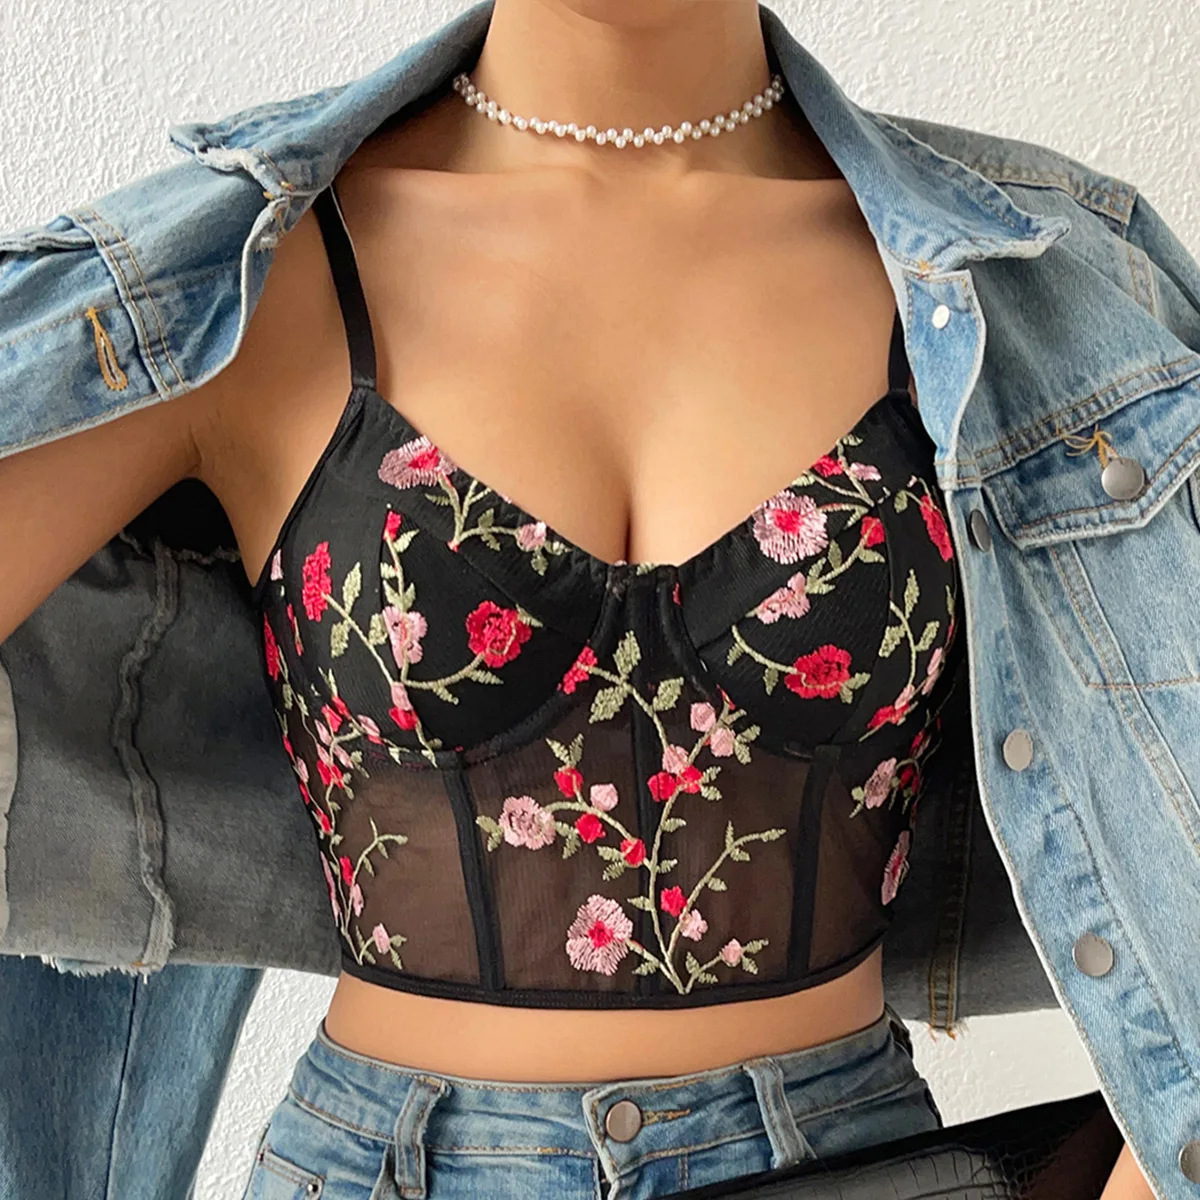 

Embroidery Floral Bustier Mesh Black Crop Top with Buckle Halter Tank Tops Female Lingerie Corset Womens Slim Camisole Partyclub